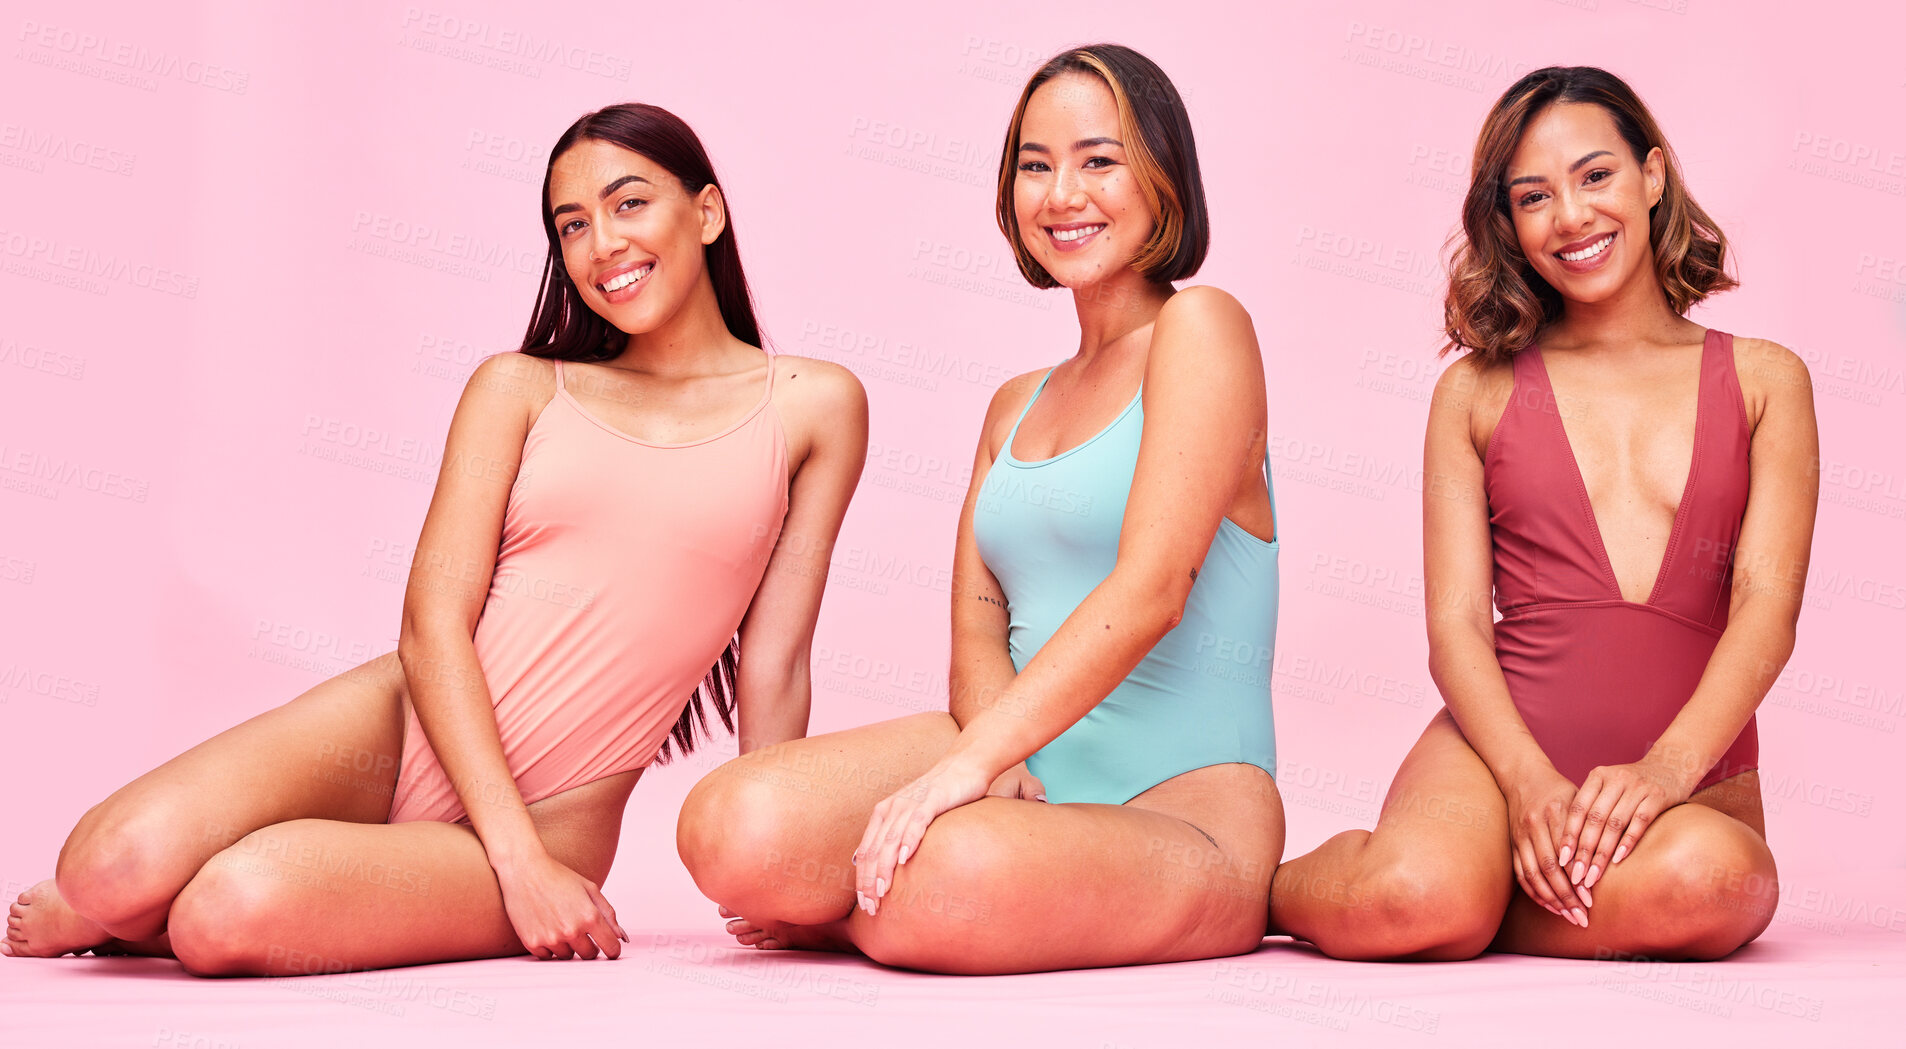 Buy stock photo Diversity, swimsuit and portrait of happy women in studio, sitting together with smile and body positivity. Beauty, summer fashion and bikini models with self love, equality and pink background.